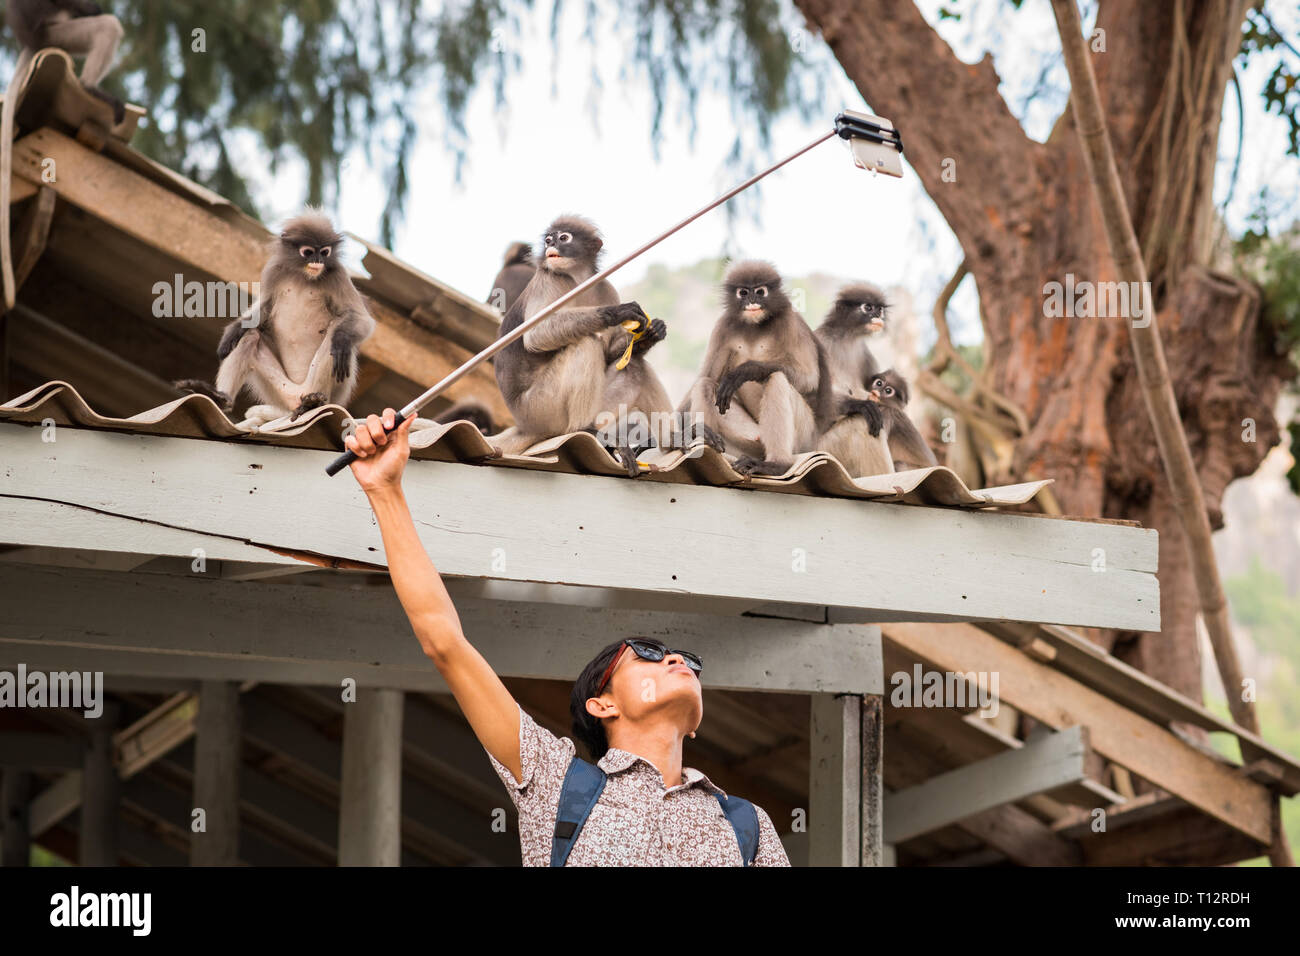 Selfie with monkeys. Young Asian man uses a selfie stick to take a photo with a group of cute dusky leaf monkeys who sit on the roof. Stock Photo